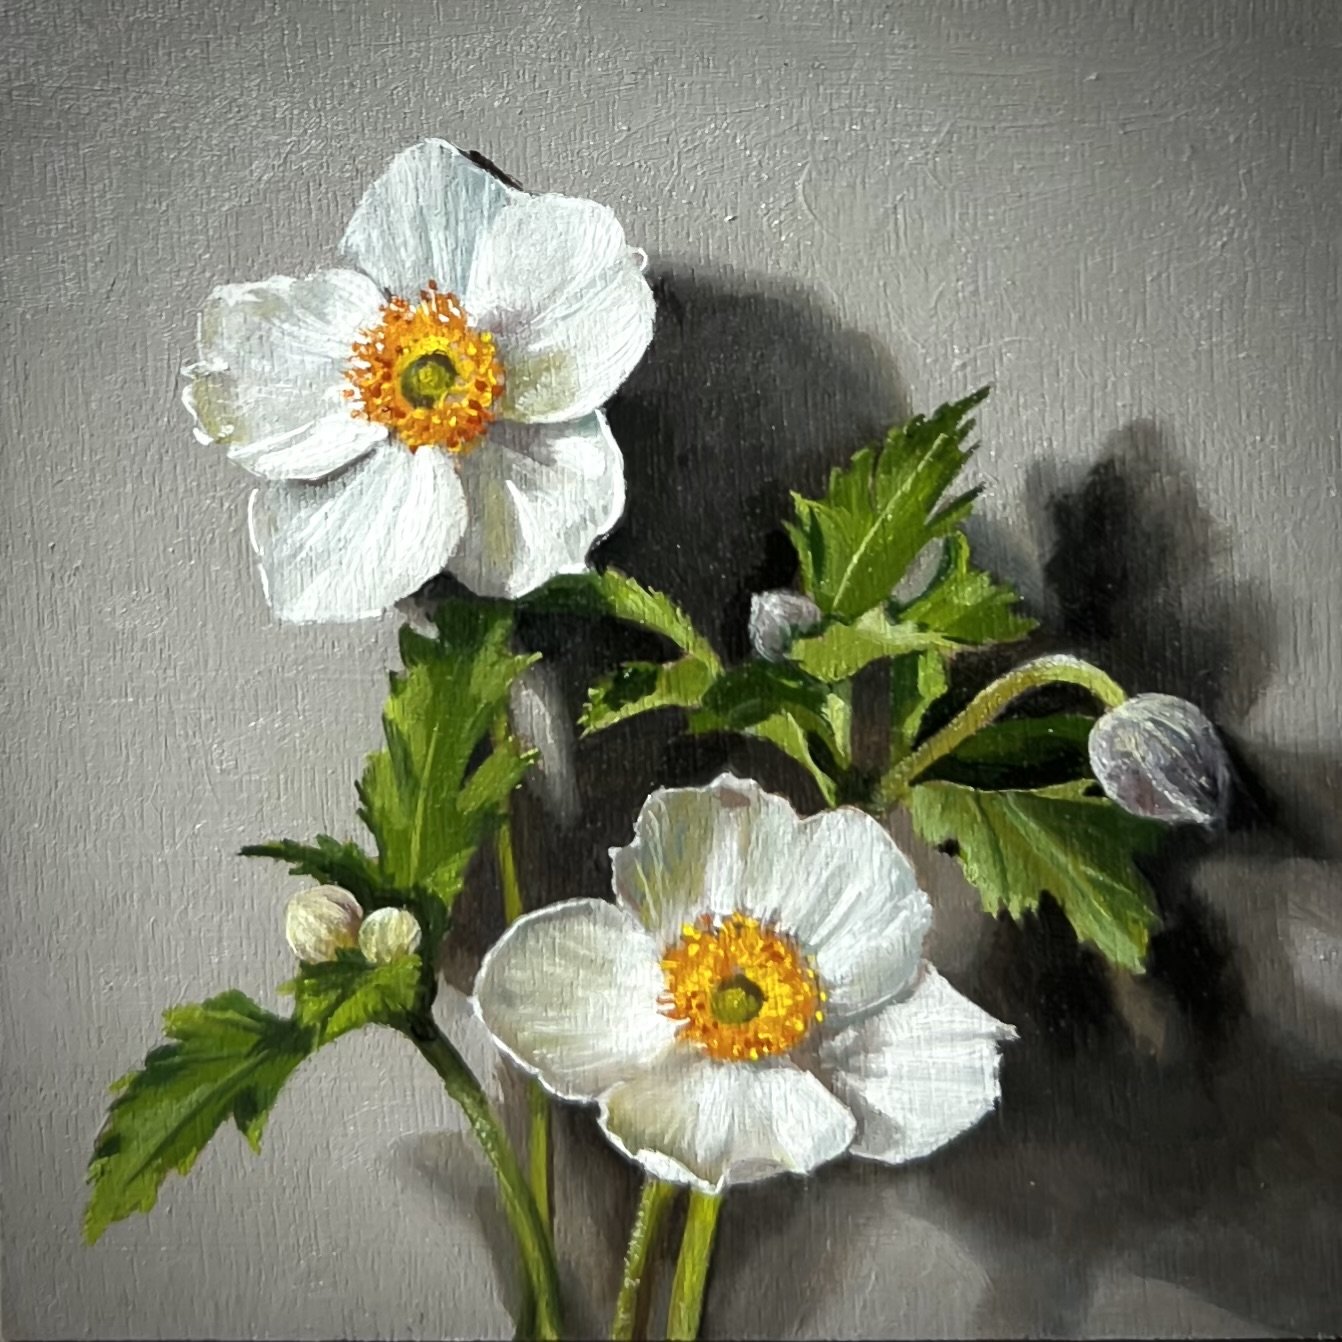 Two Japanese Anemone